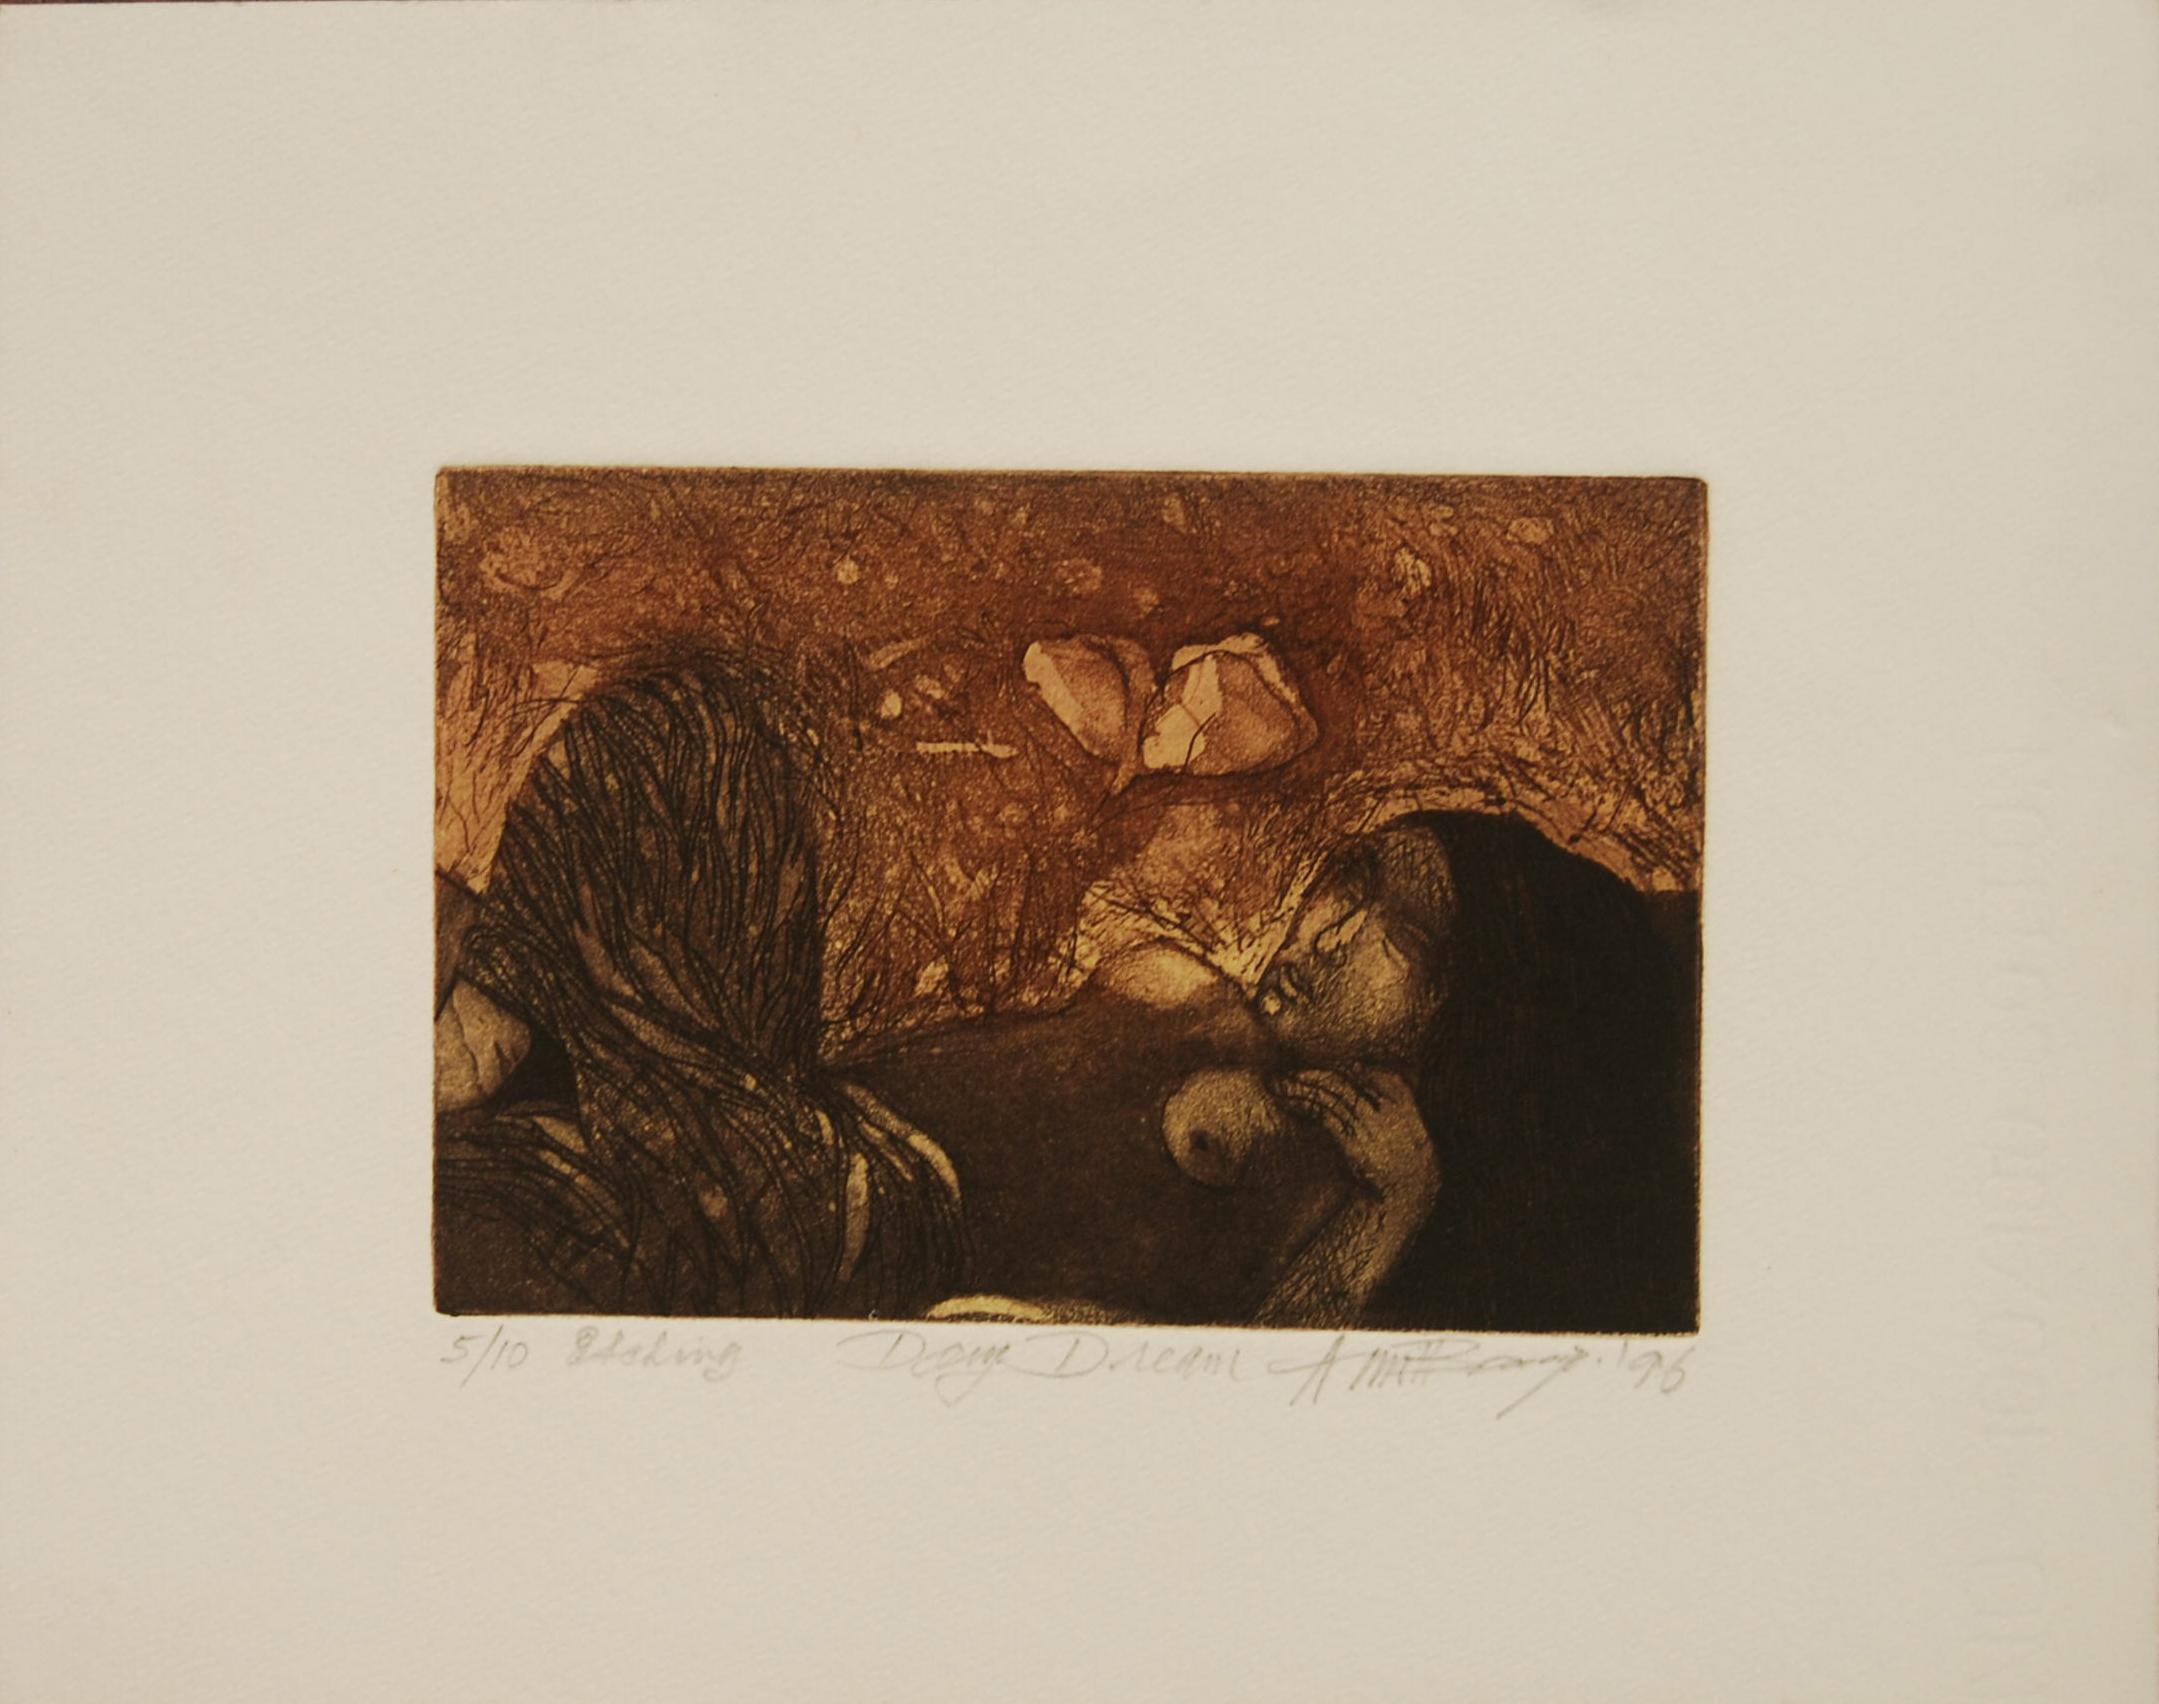 Amitabha Banerjee Figurative Painting - Day Dream, Etching on paper, Brown, Black colors by Indian Artist "In Stock"